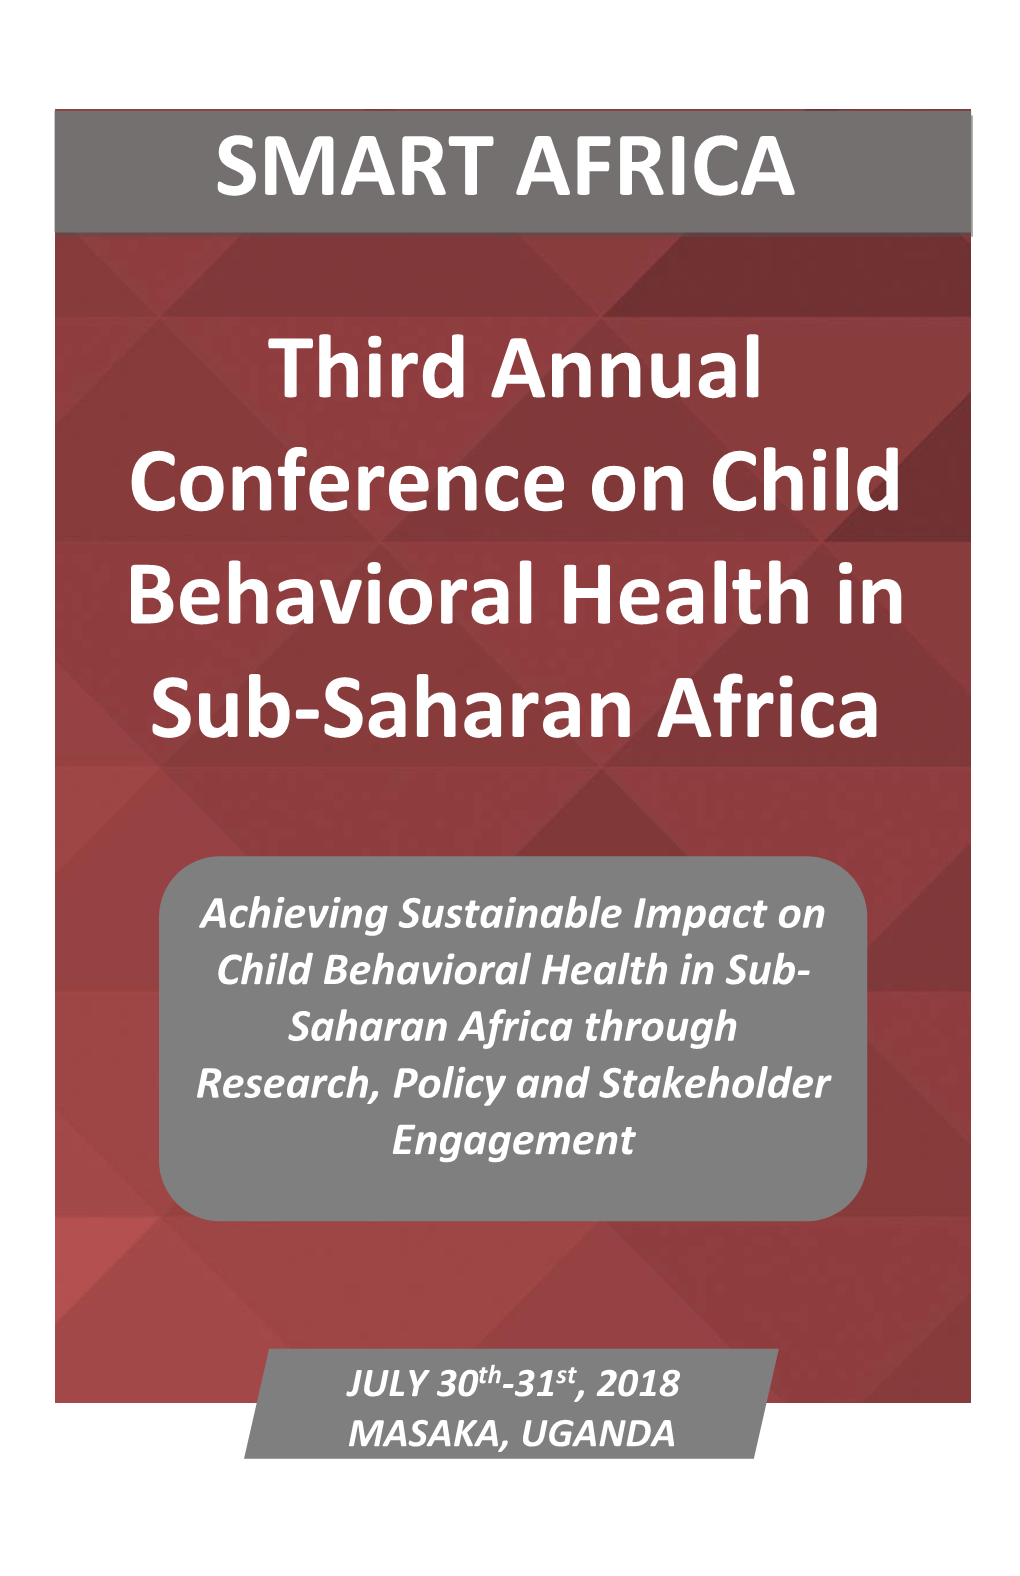 Third Annual Conference on Child Behavioral Health in Sub-Saharan Africa